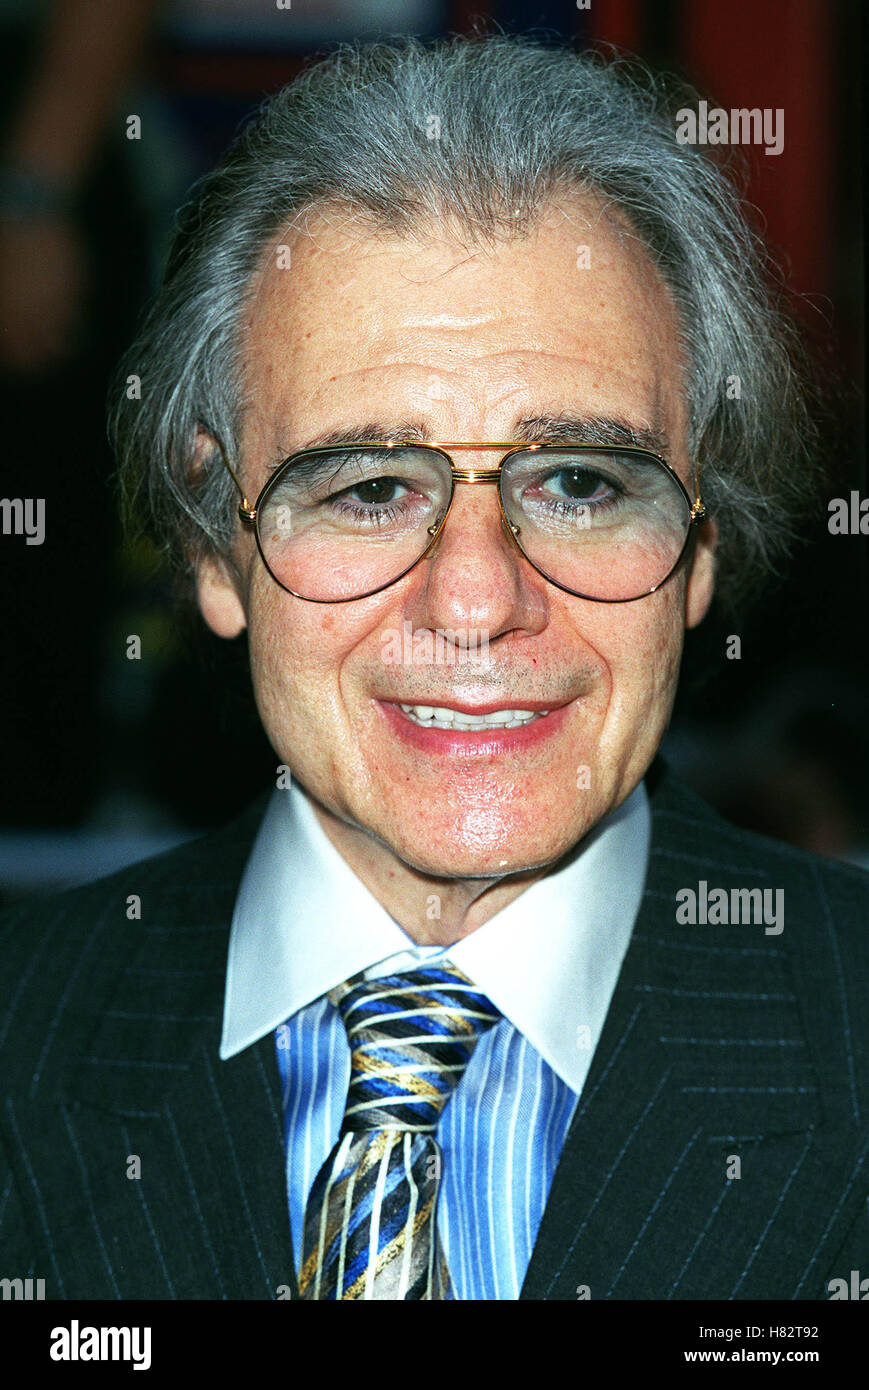 LALO SCHIFRIN 'RUSH HOUR 2' FILM PREMIERE WESTWOOD LOS ANGELES USA 26 July 2001 Stock Photo